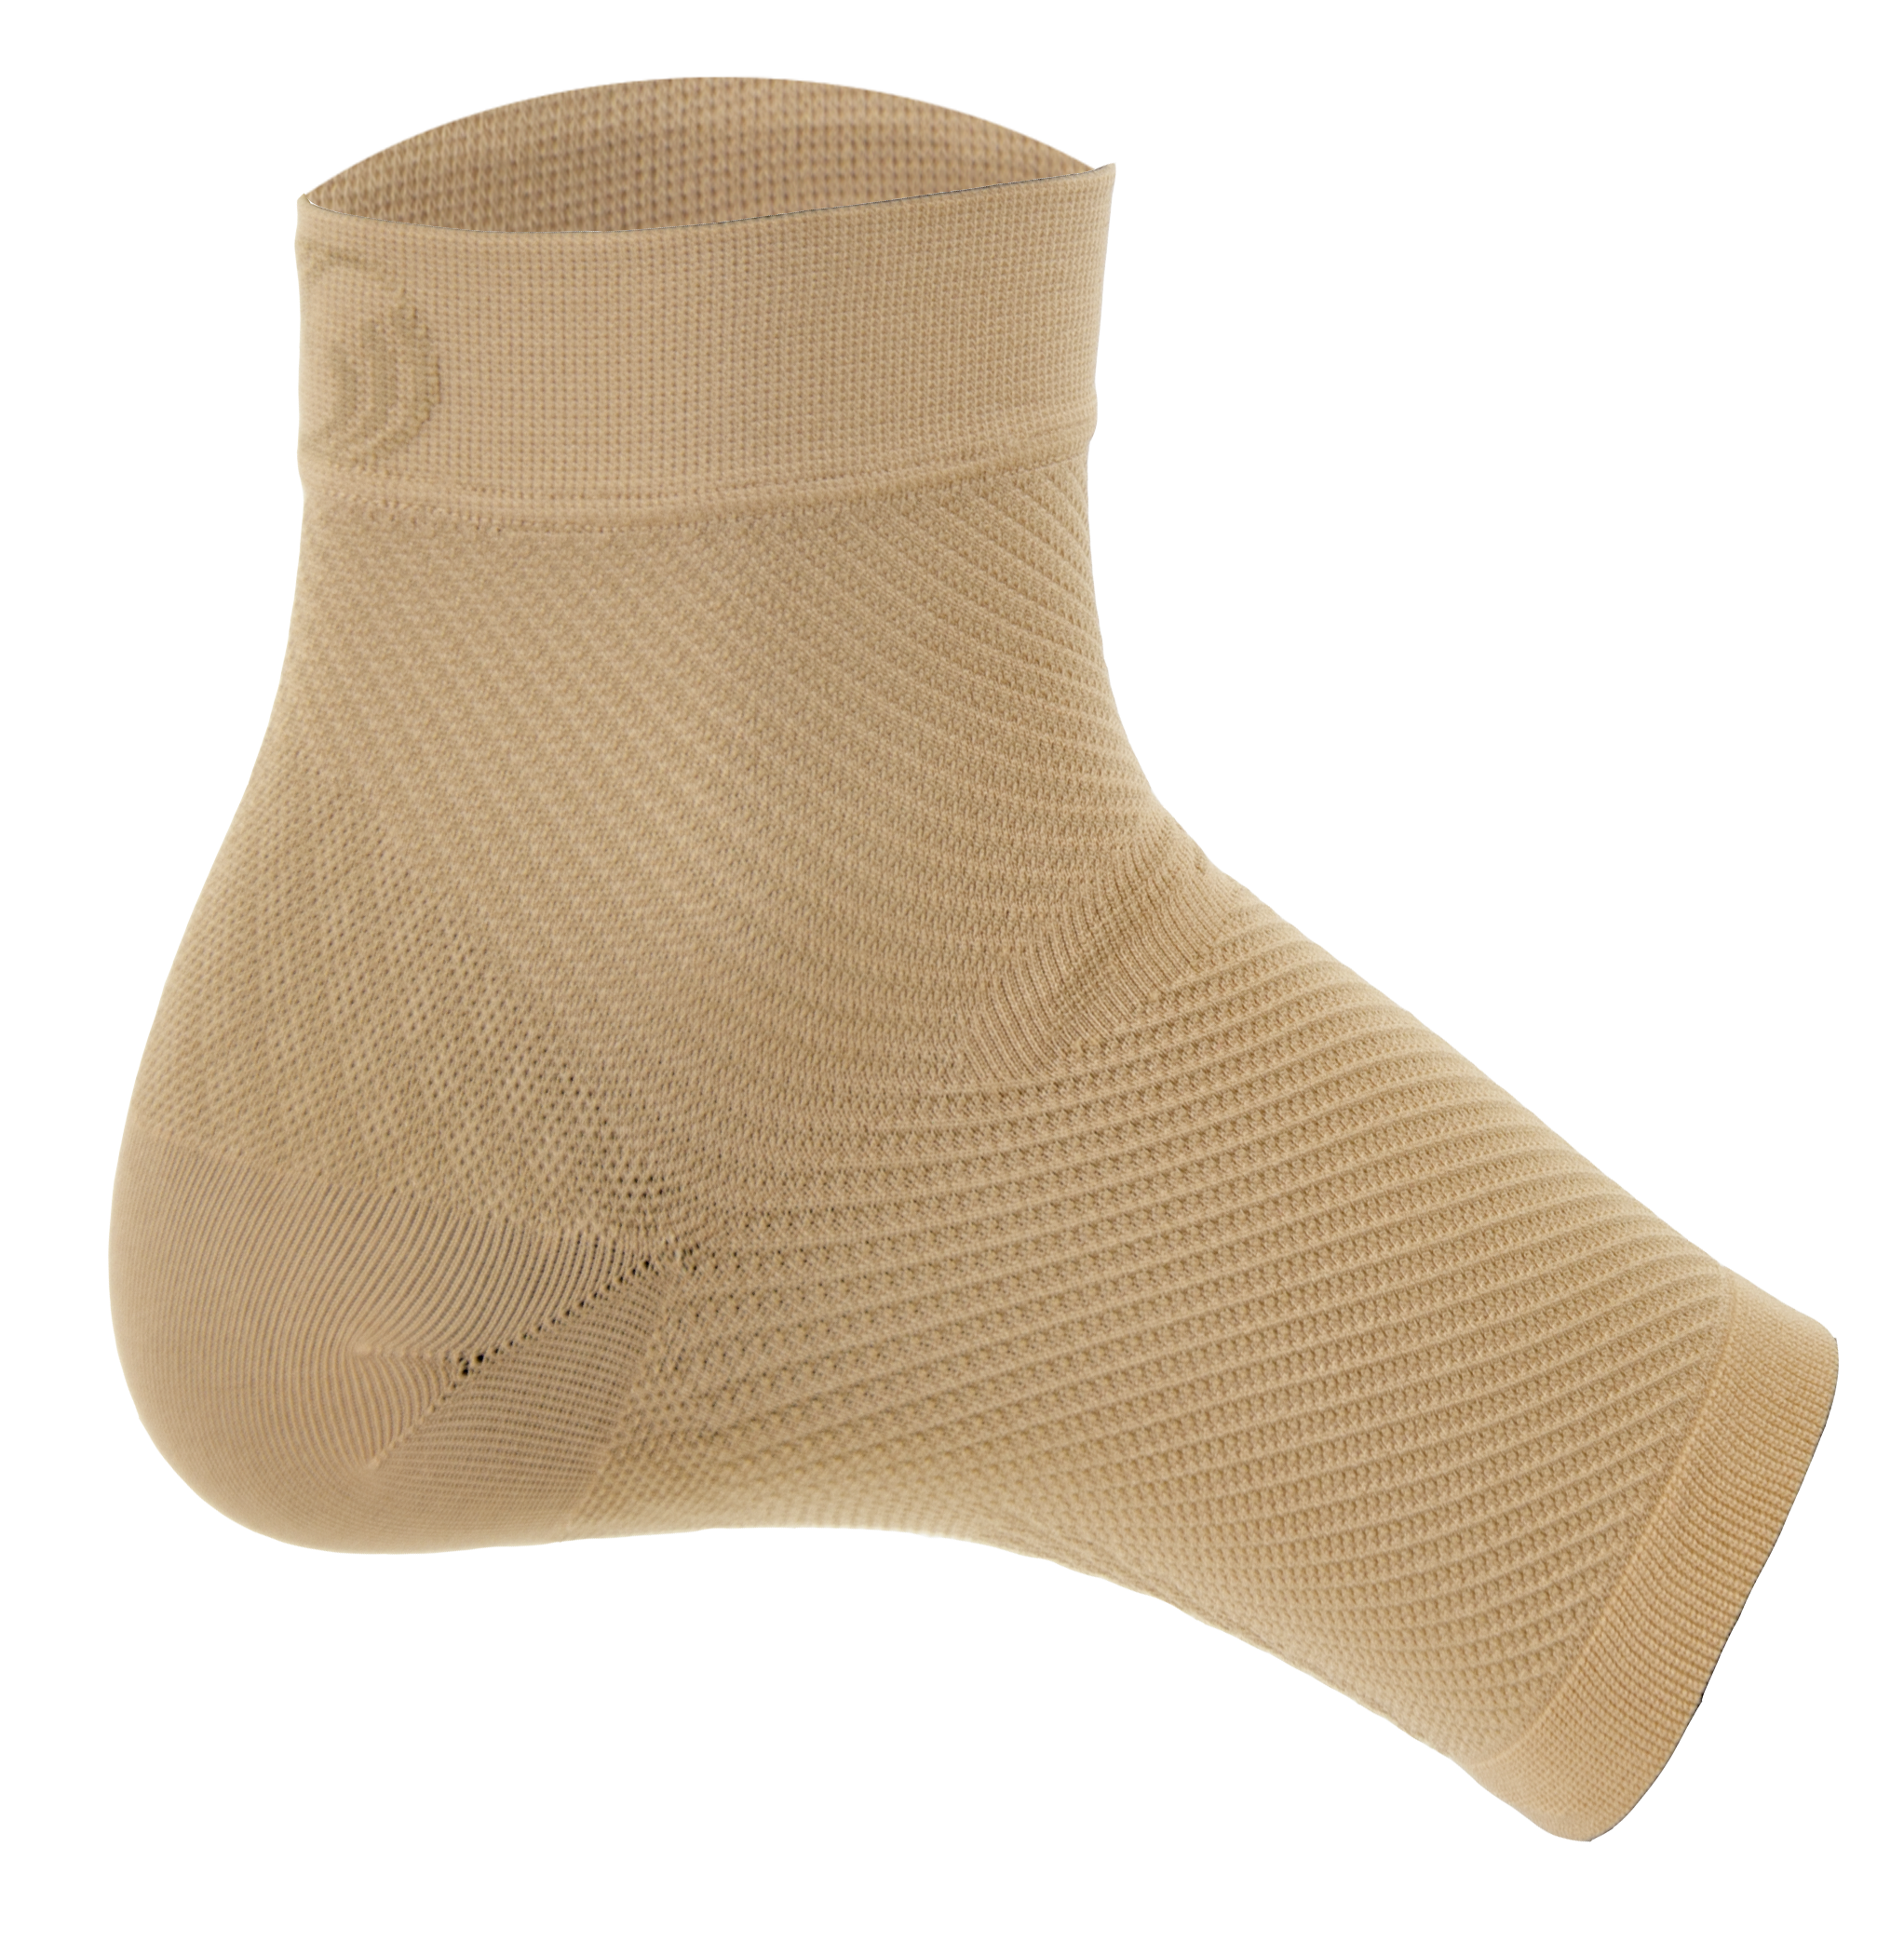 'OS1st' OS1-3234 - Performance Foot Sleeve - Natural